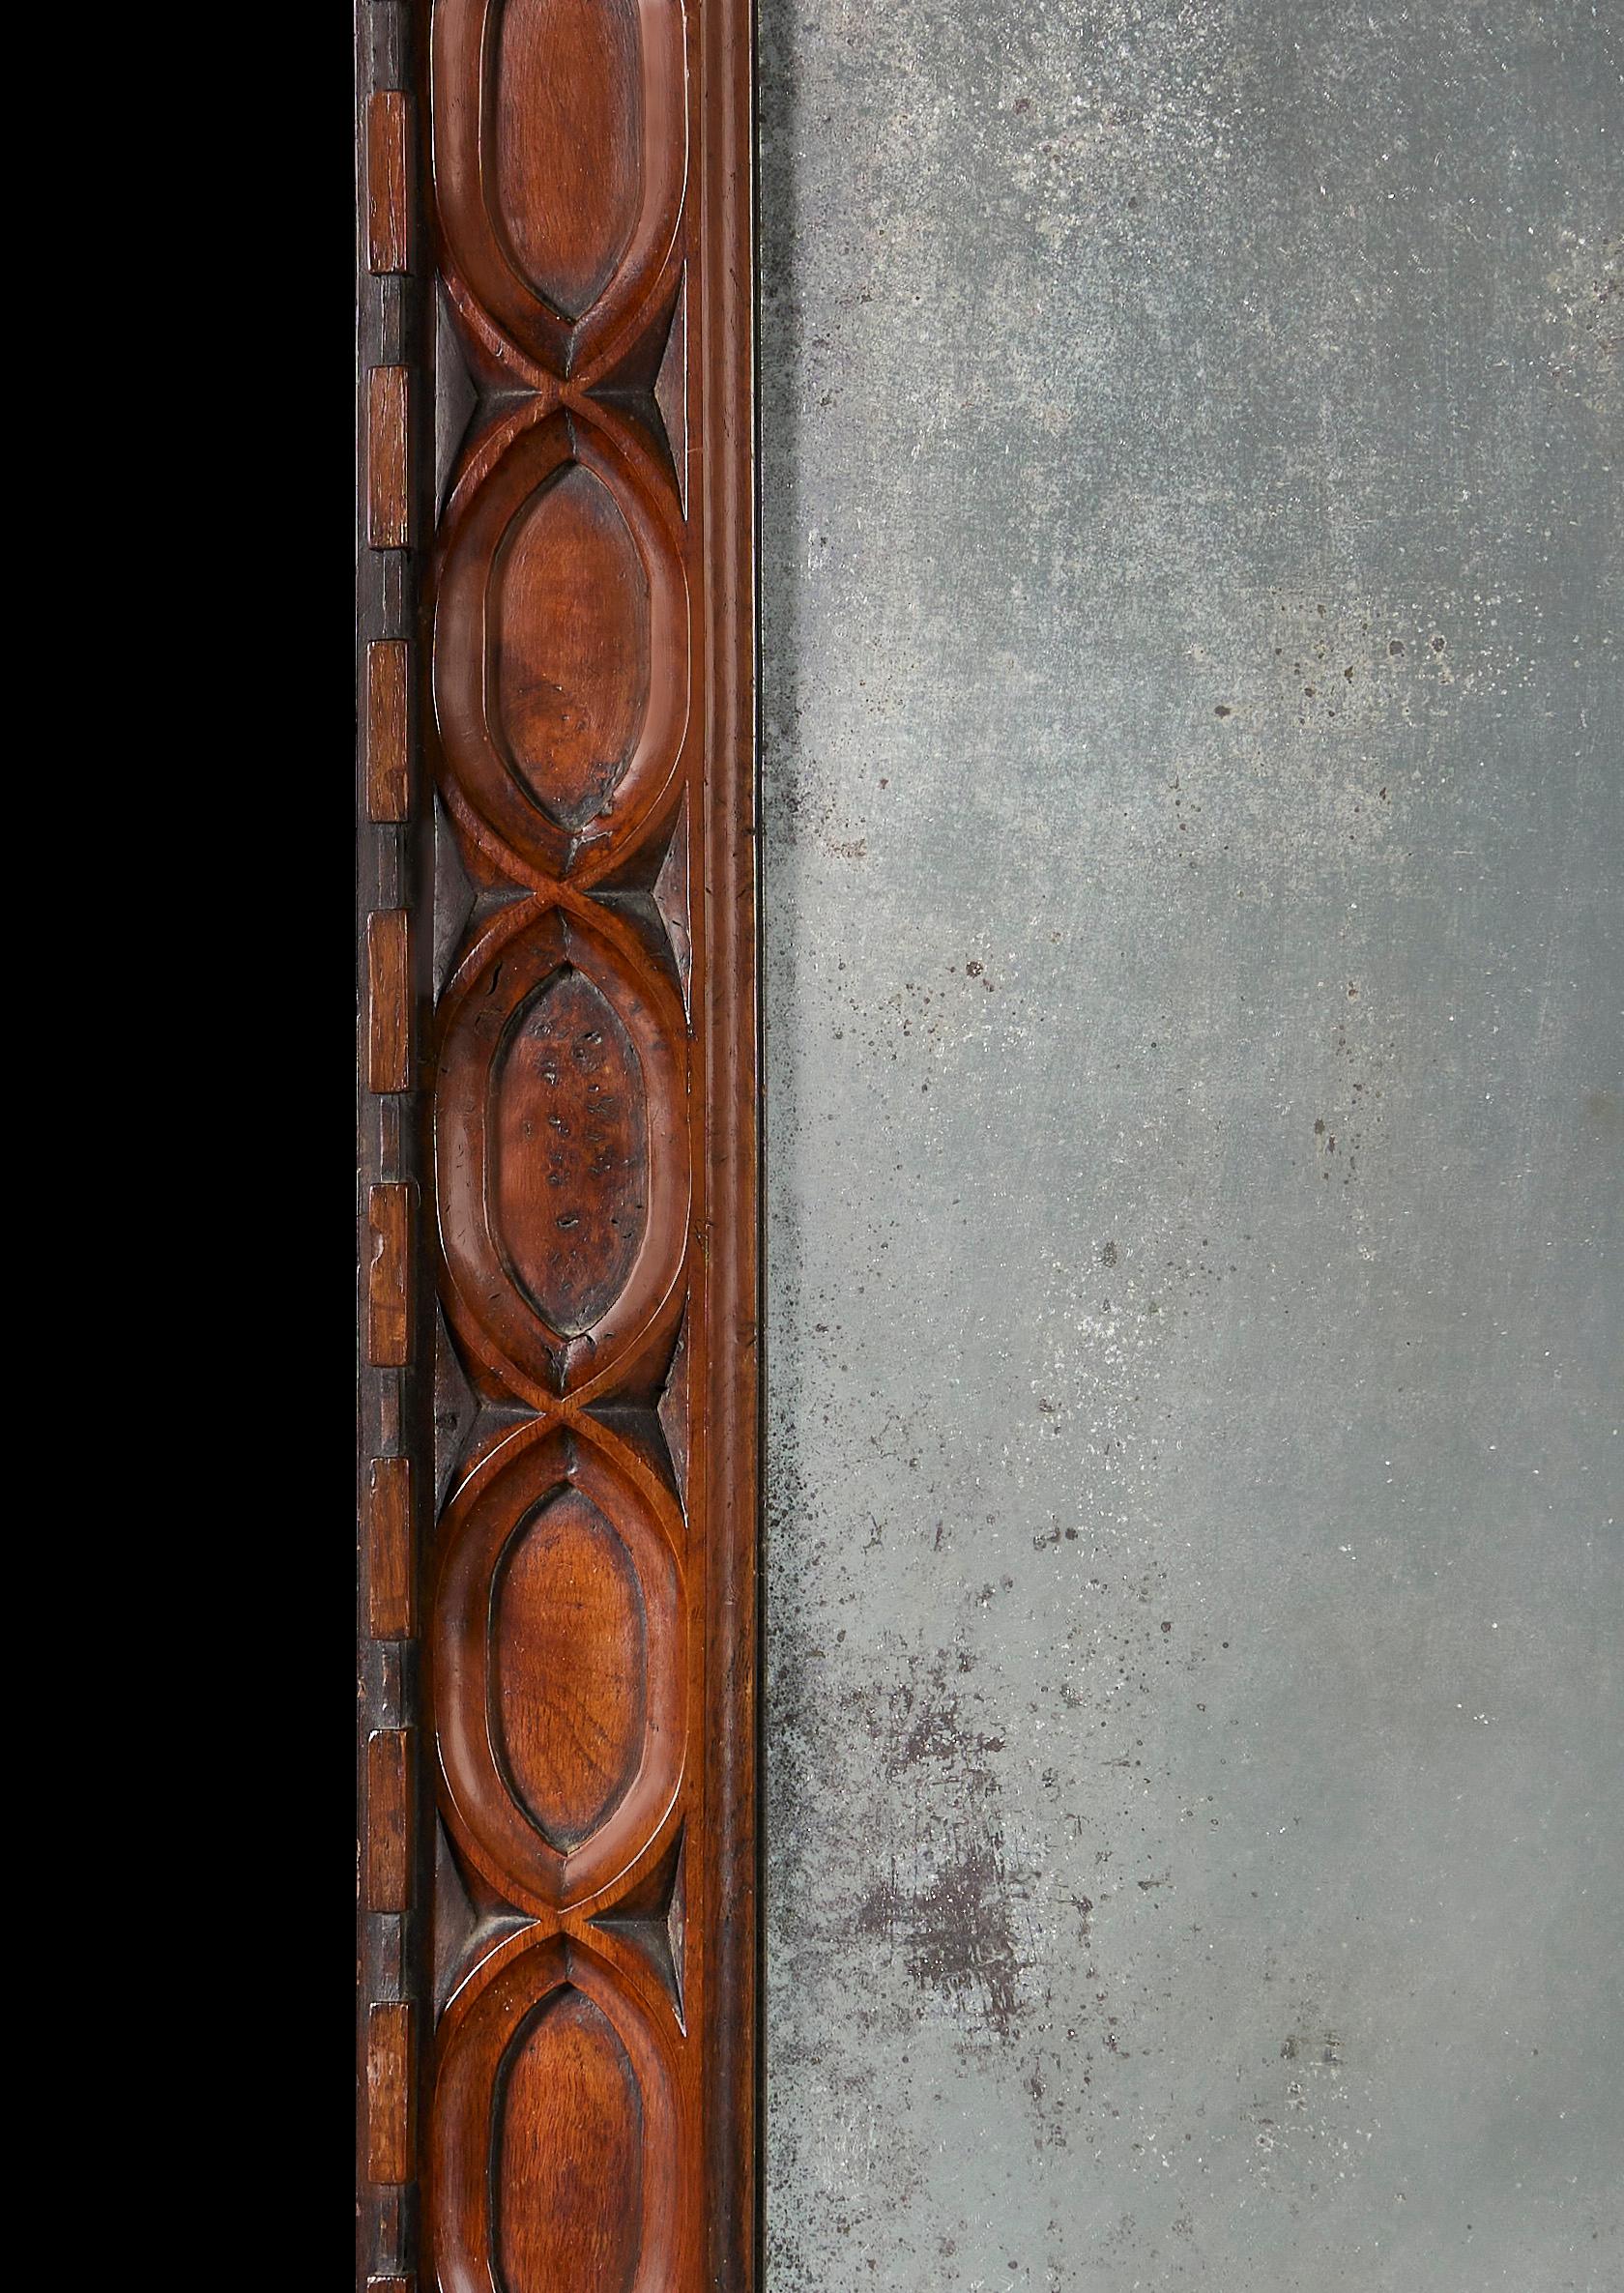 An early nineteenth century pollard oak wooden mirror frame in the Gothic style, with carved interlocking ovals and circles, with stars to each corner. With variated glass mirror plate.